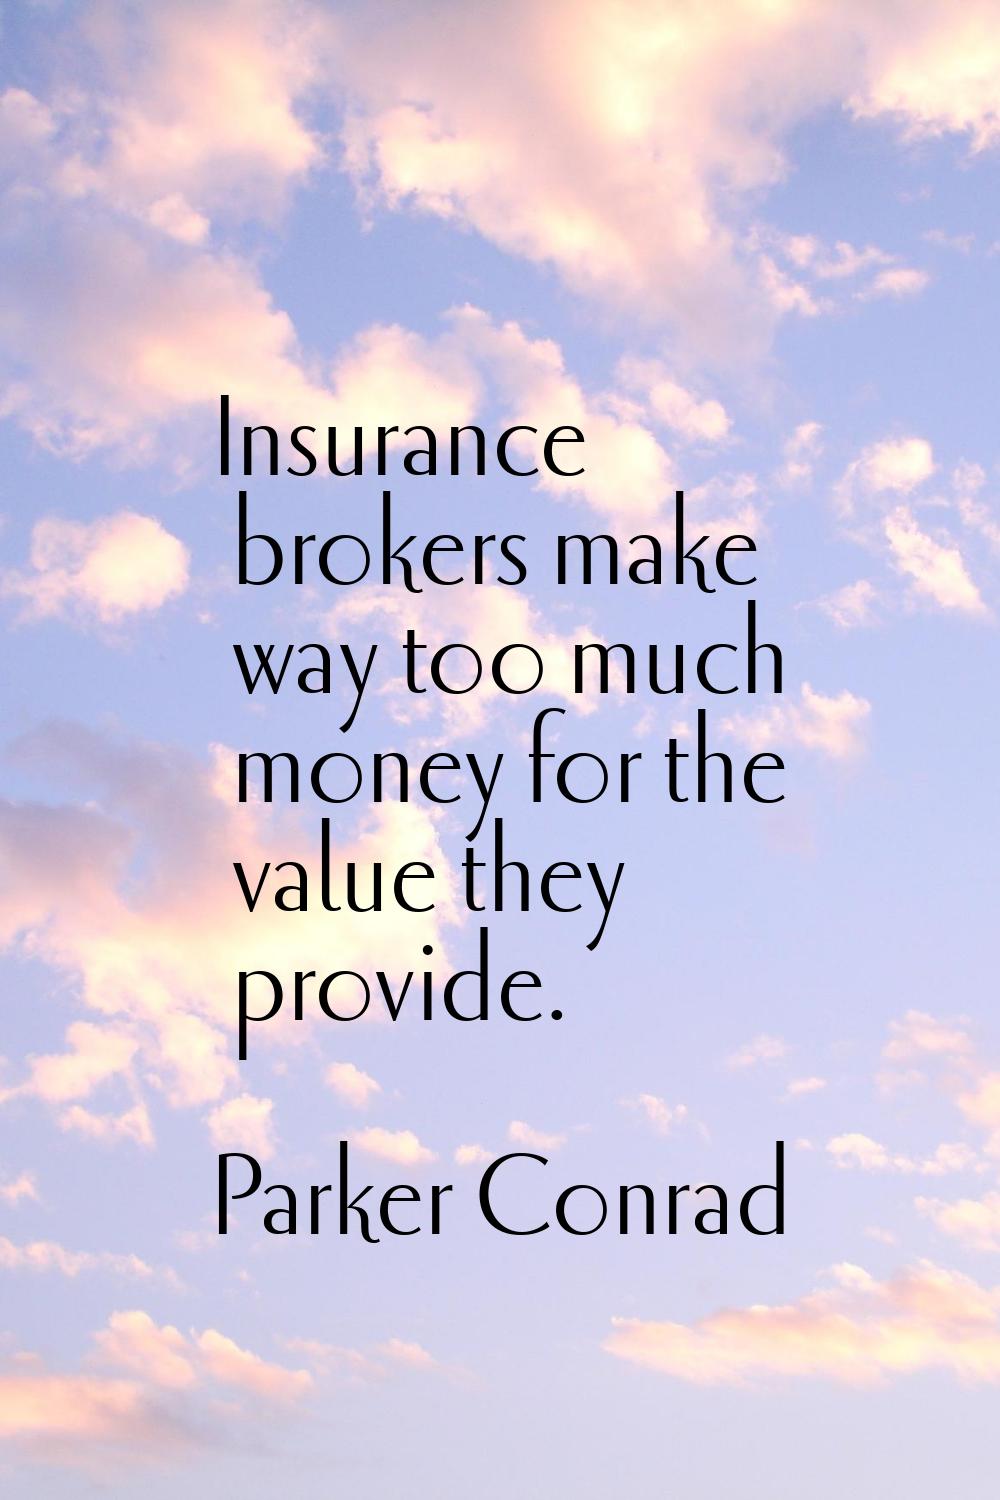 Insurance brokers make way too much money for the value they provide.